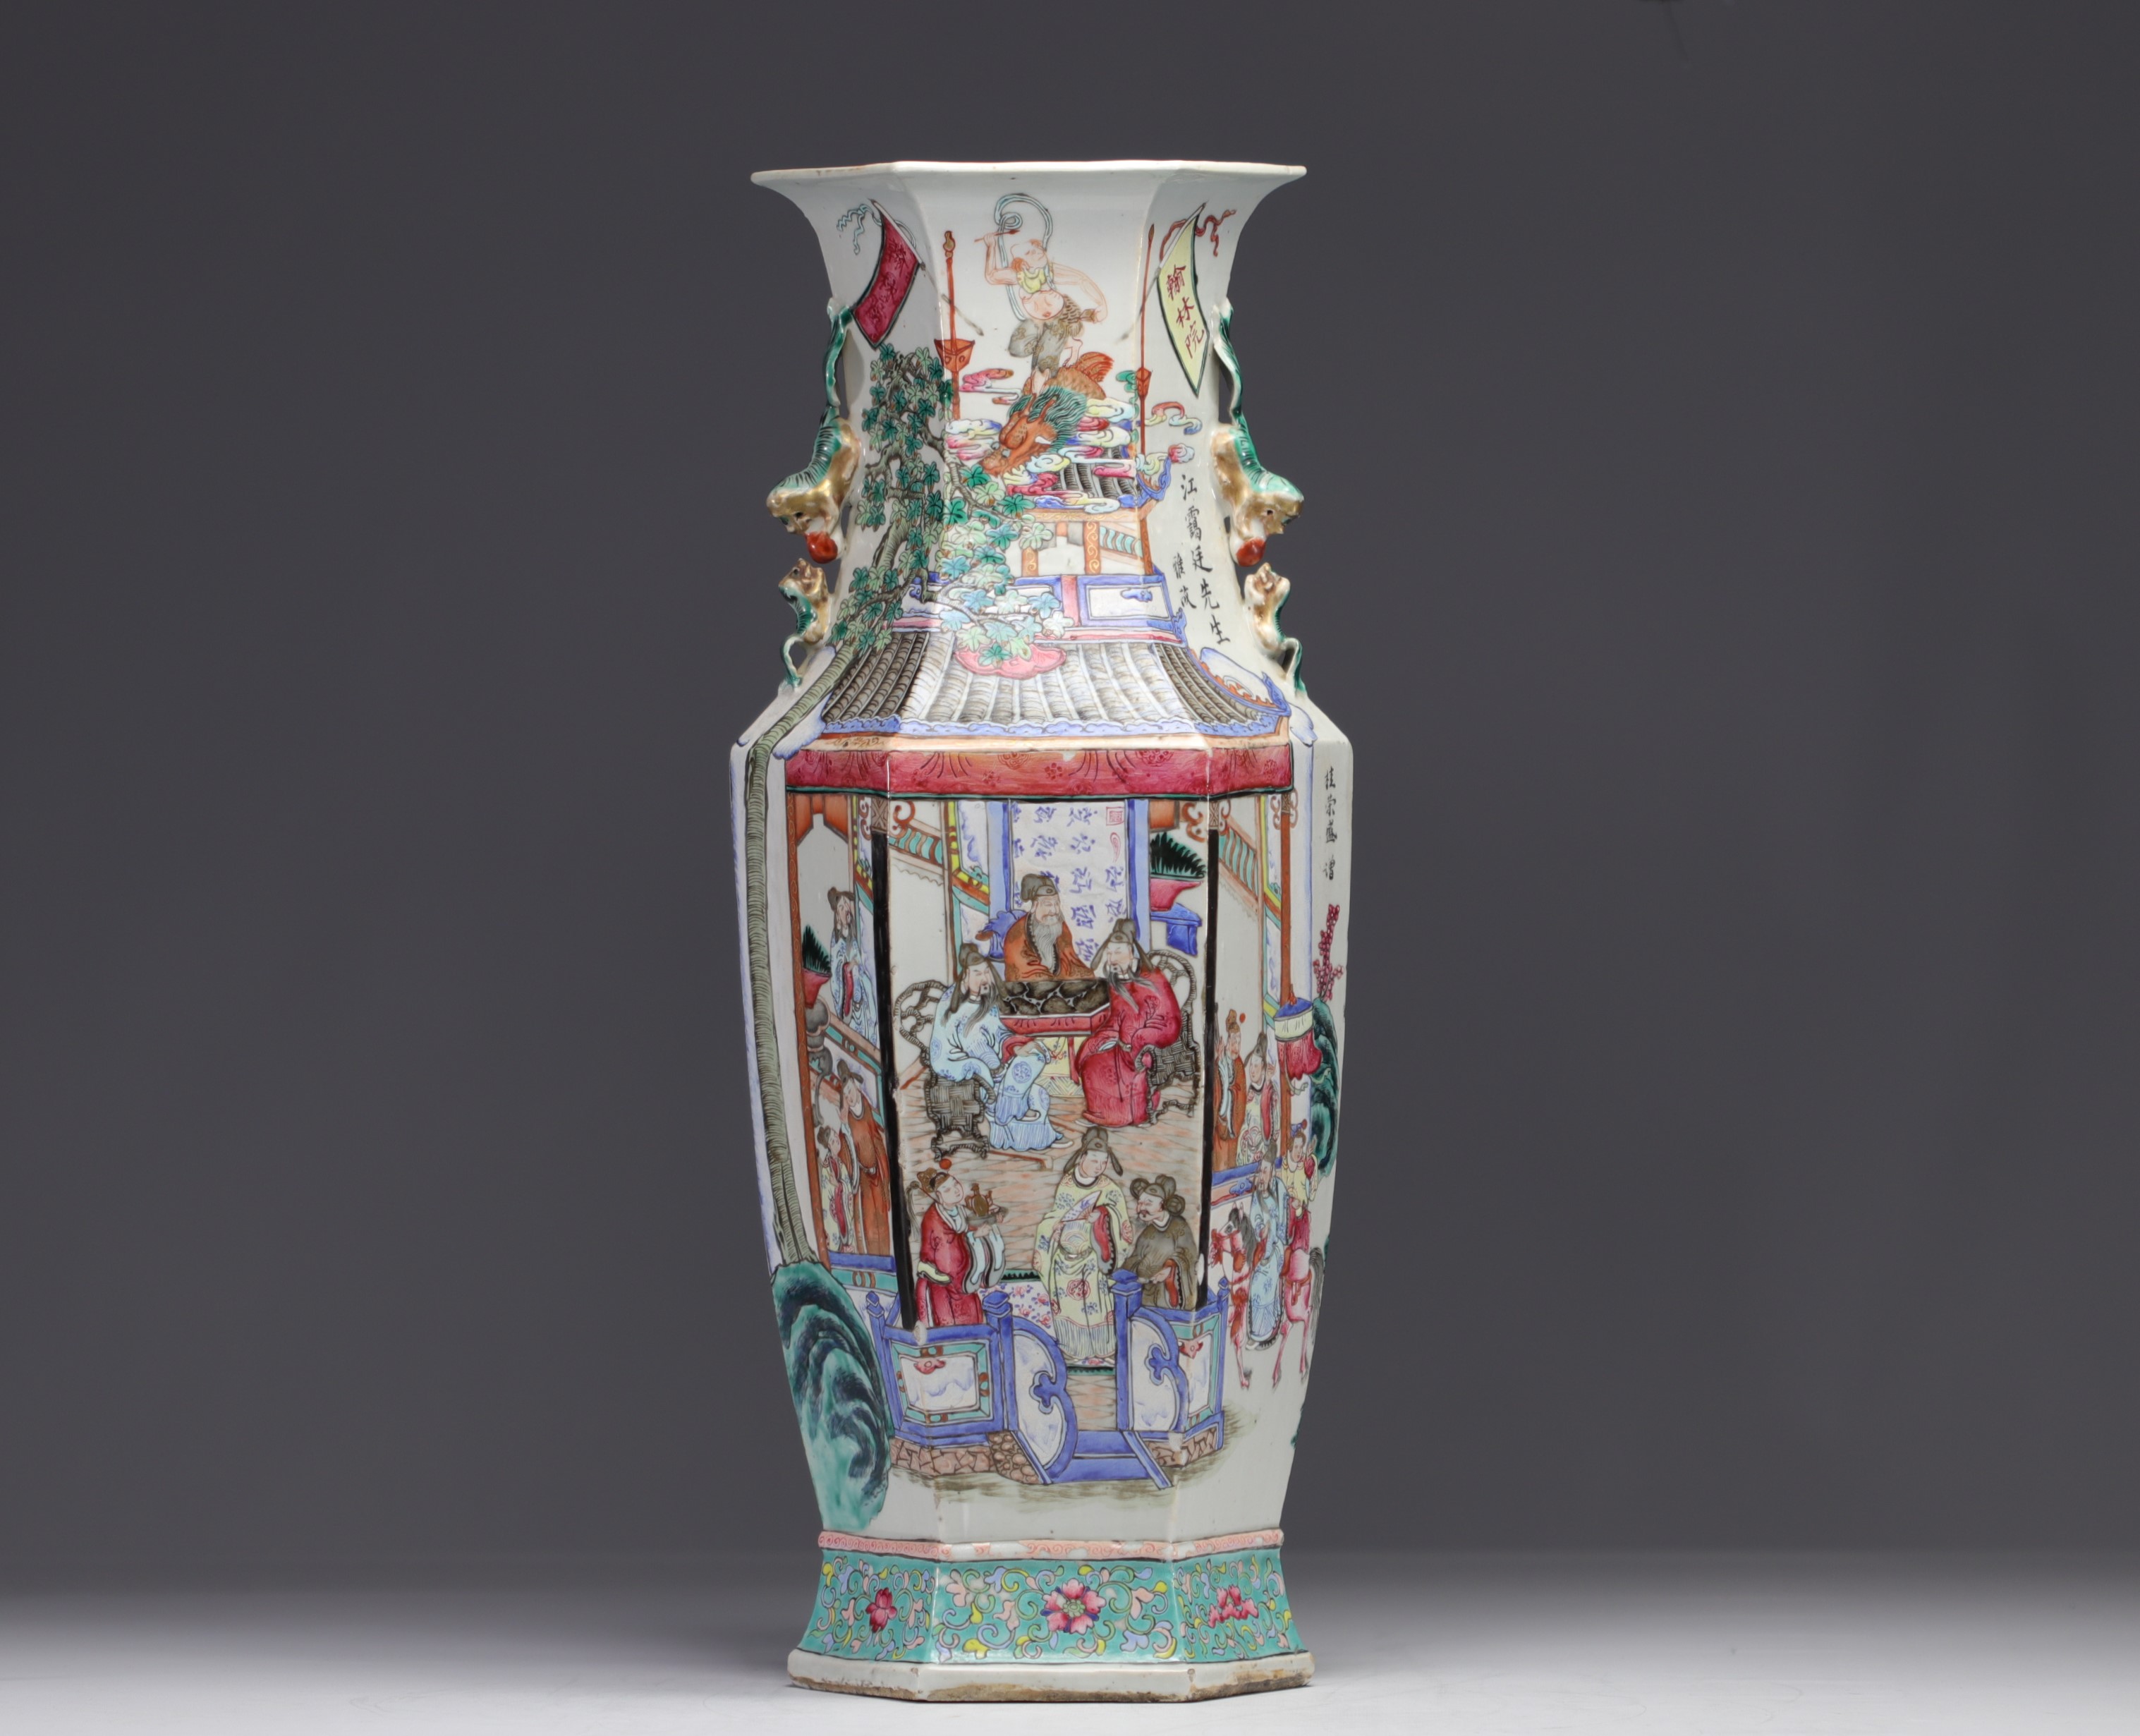 China - imposing famille rose porcelain vase decorated with scenes of life, 19th century.